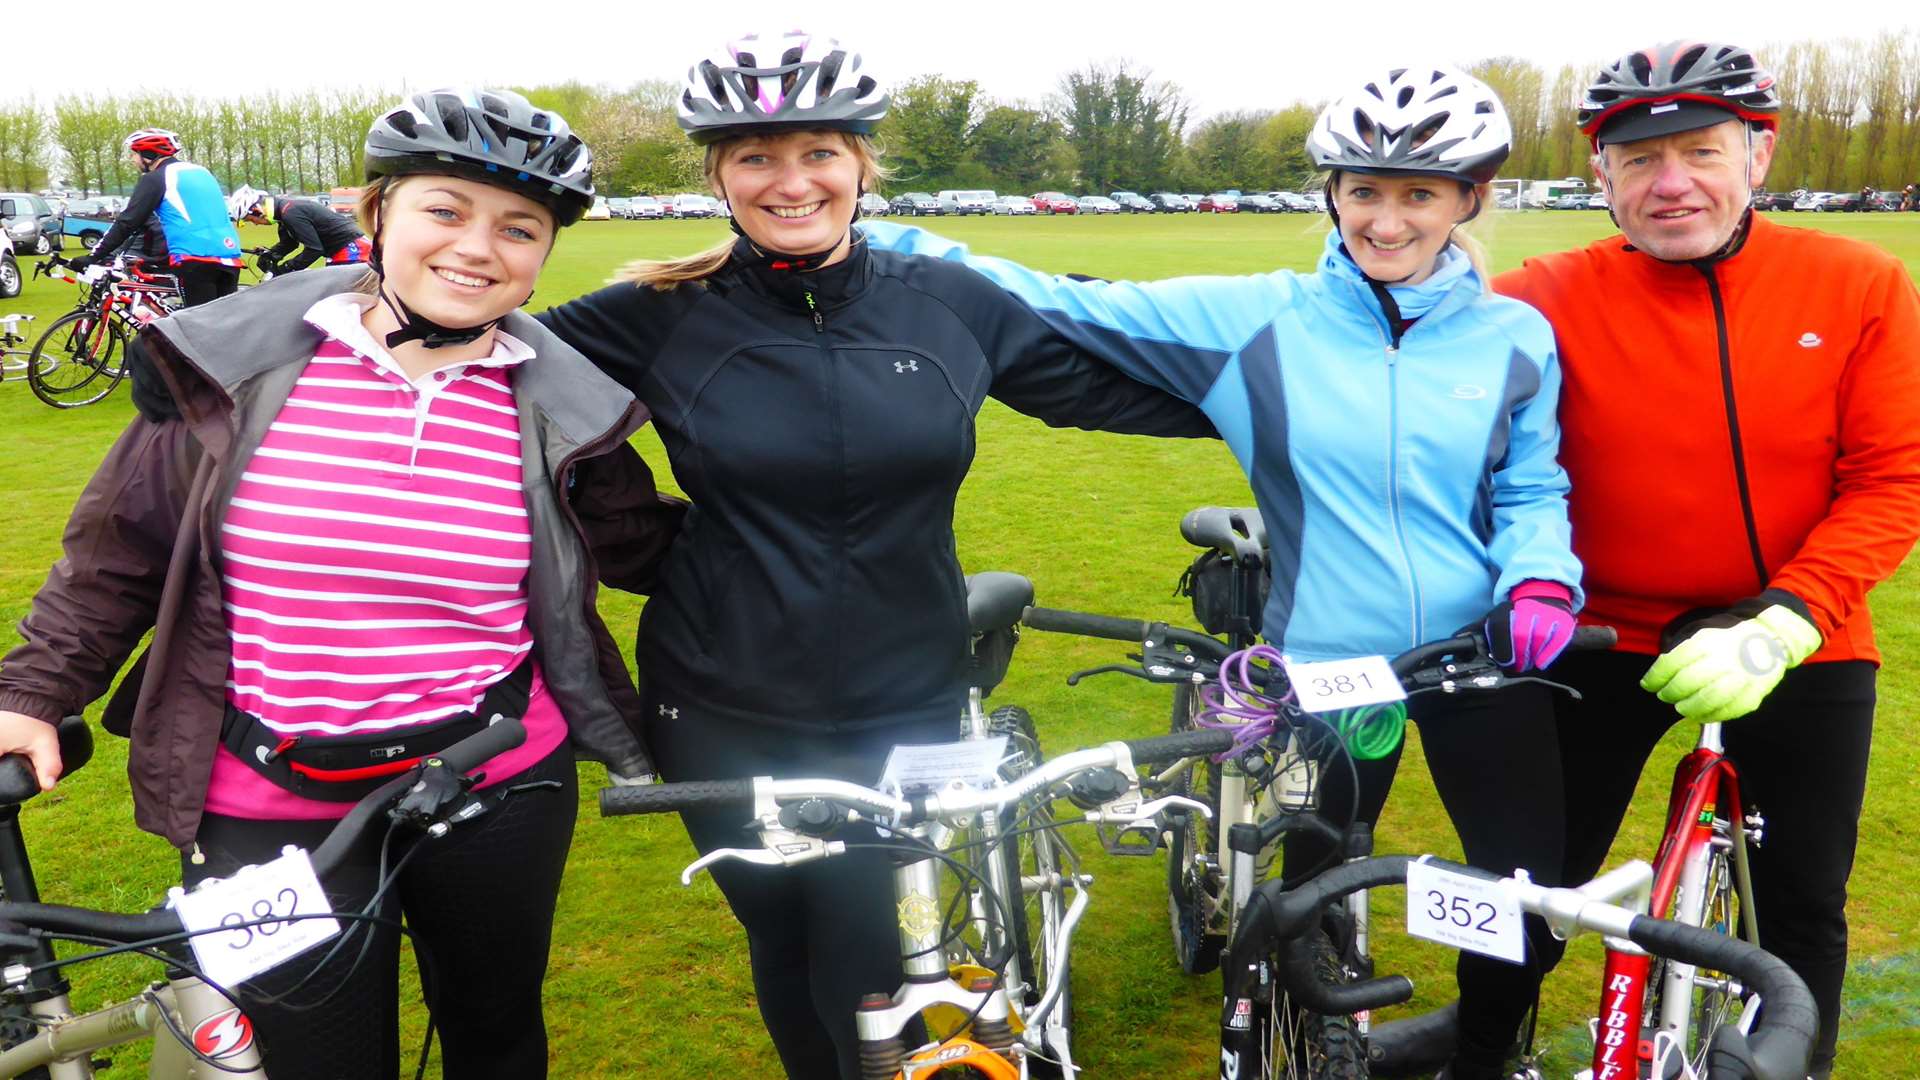 East Langdon, Dover riders Meg Coates, Joanne Waller, Nicola Varrall, and Ian Howard on 50k ride at last year's event. Tickets are still available for the 2016 ride.